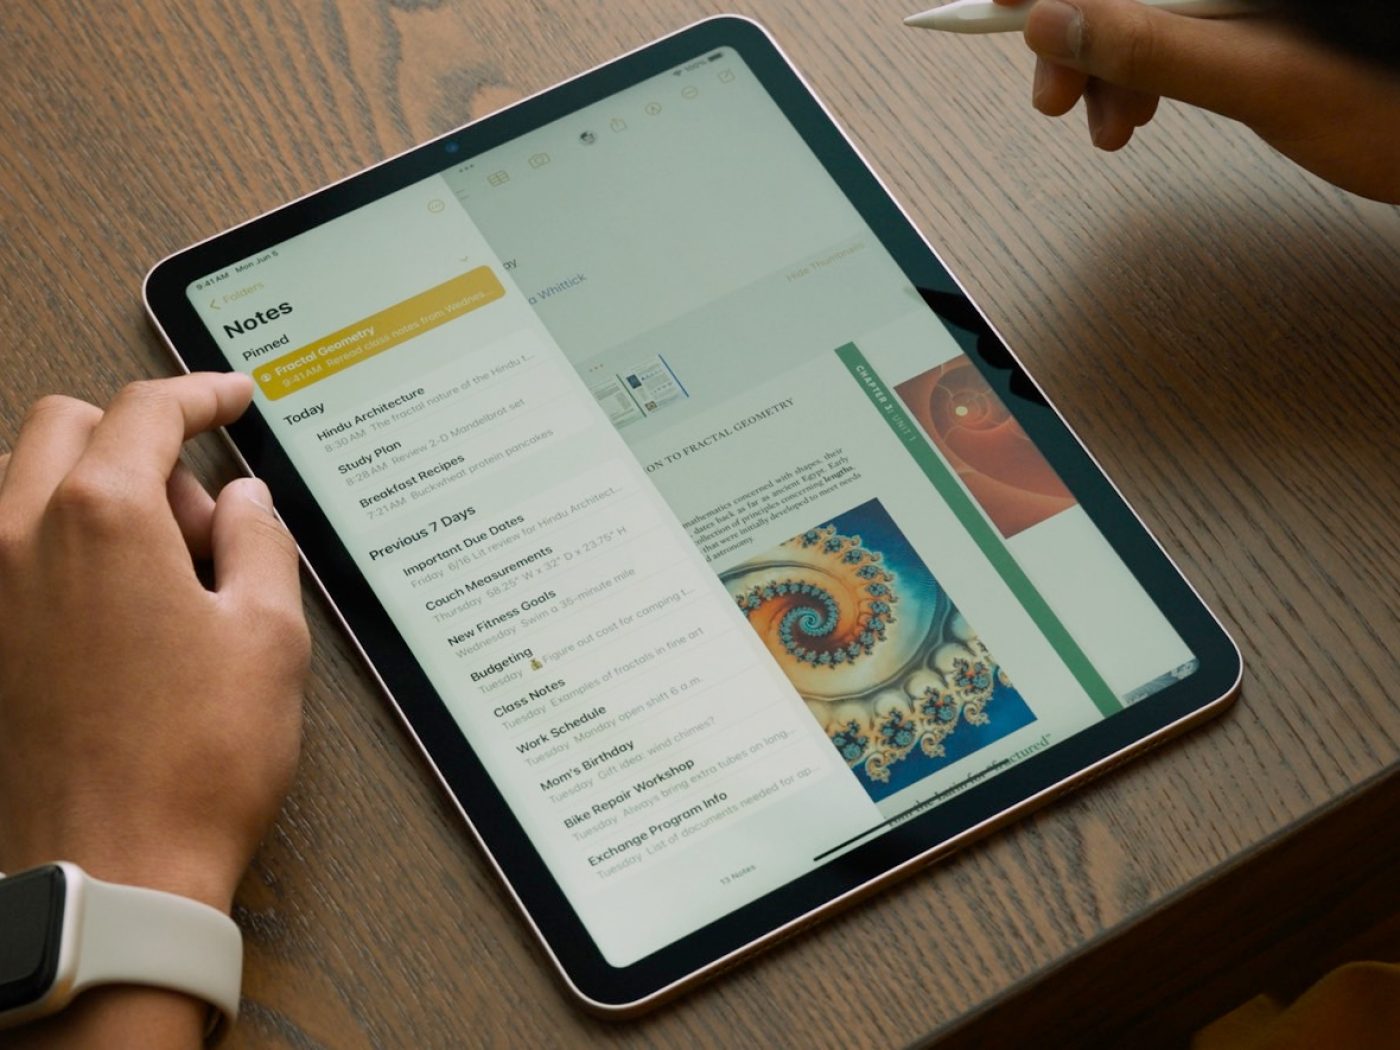 New iPad Mini 7: News and Expected Price, Release Date, Specs; and More  Rumors